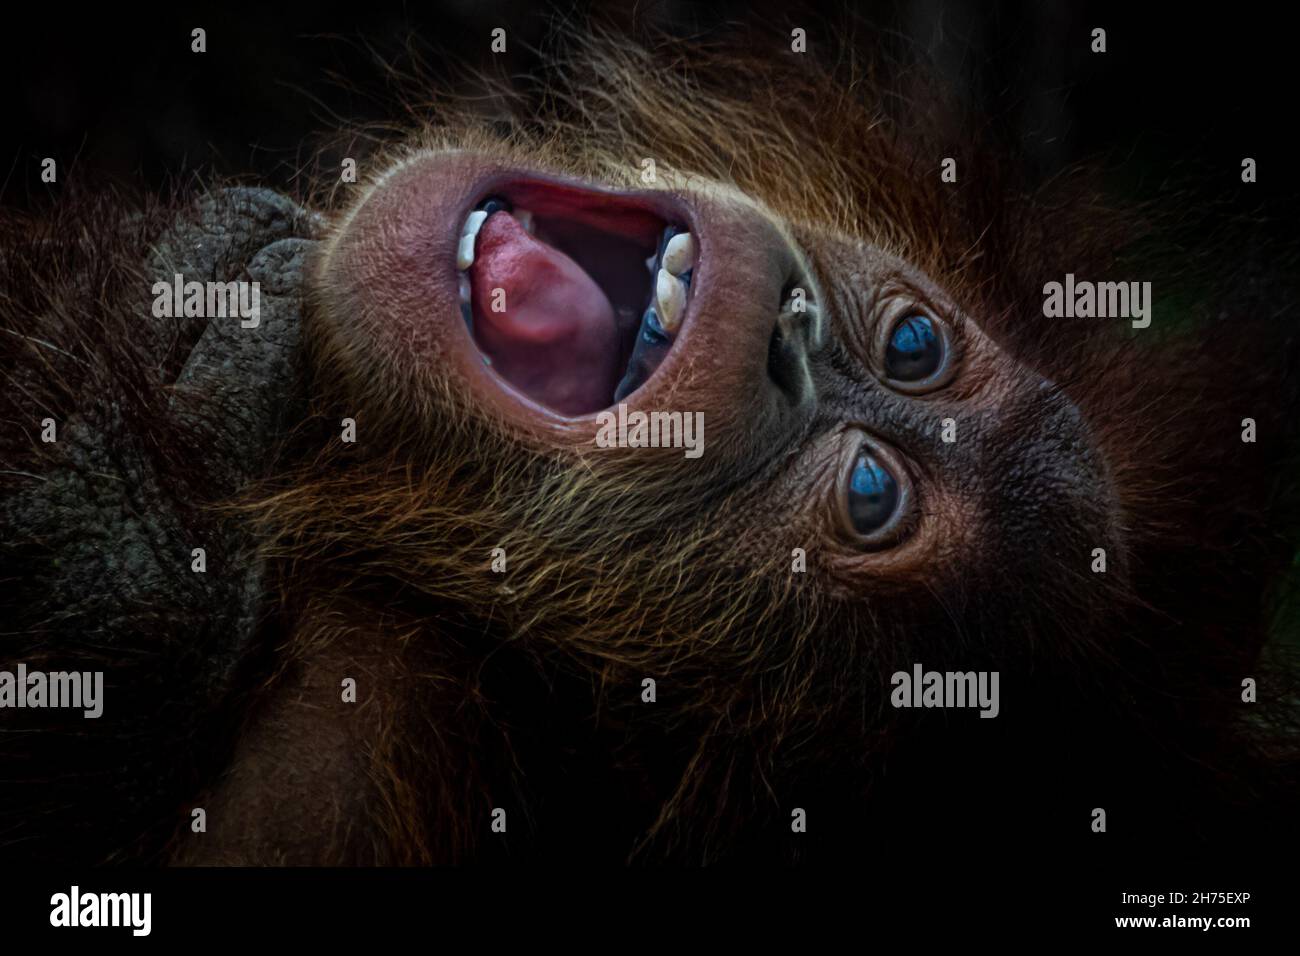 Artistic portrait of a  young Orang-Utan playing Stock Photo